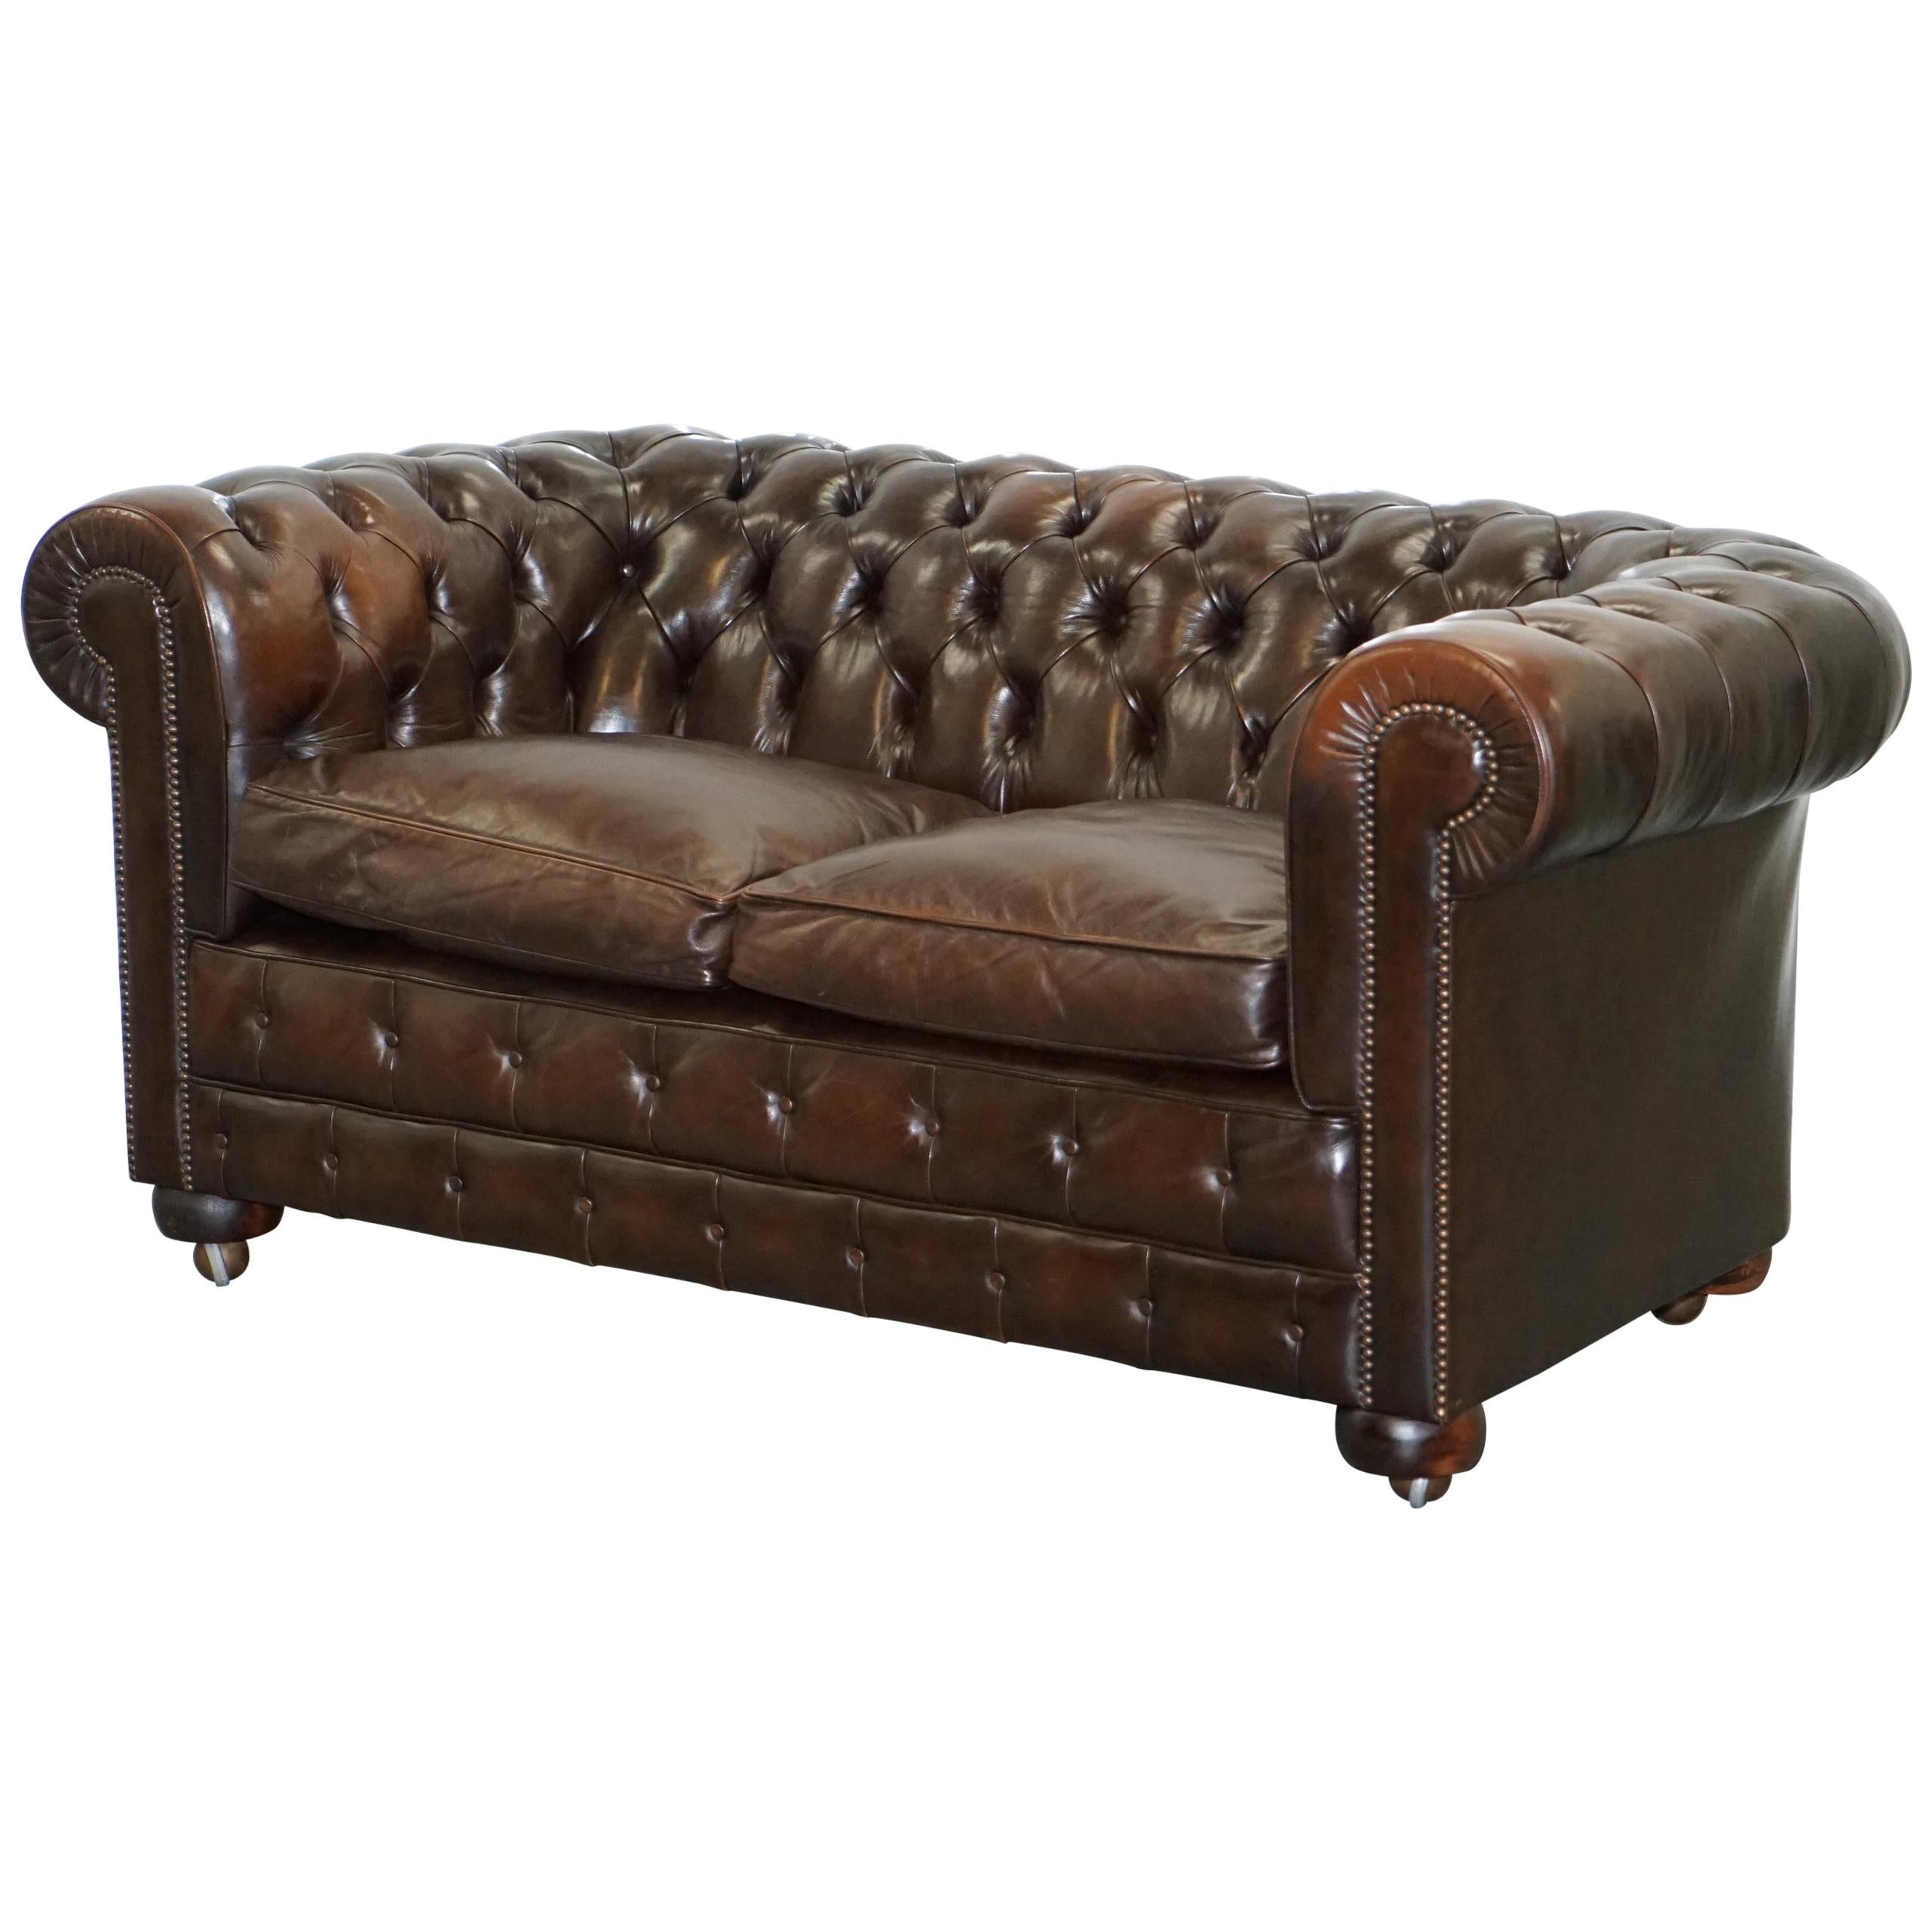 Chesterfield Brown Leather Two-Seat Sofa Coil Sprung Feather Filled Cushions 